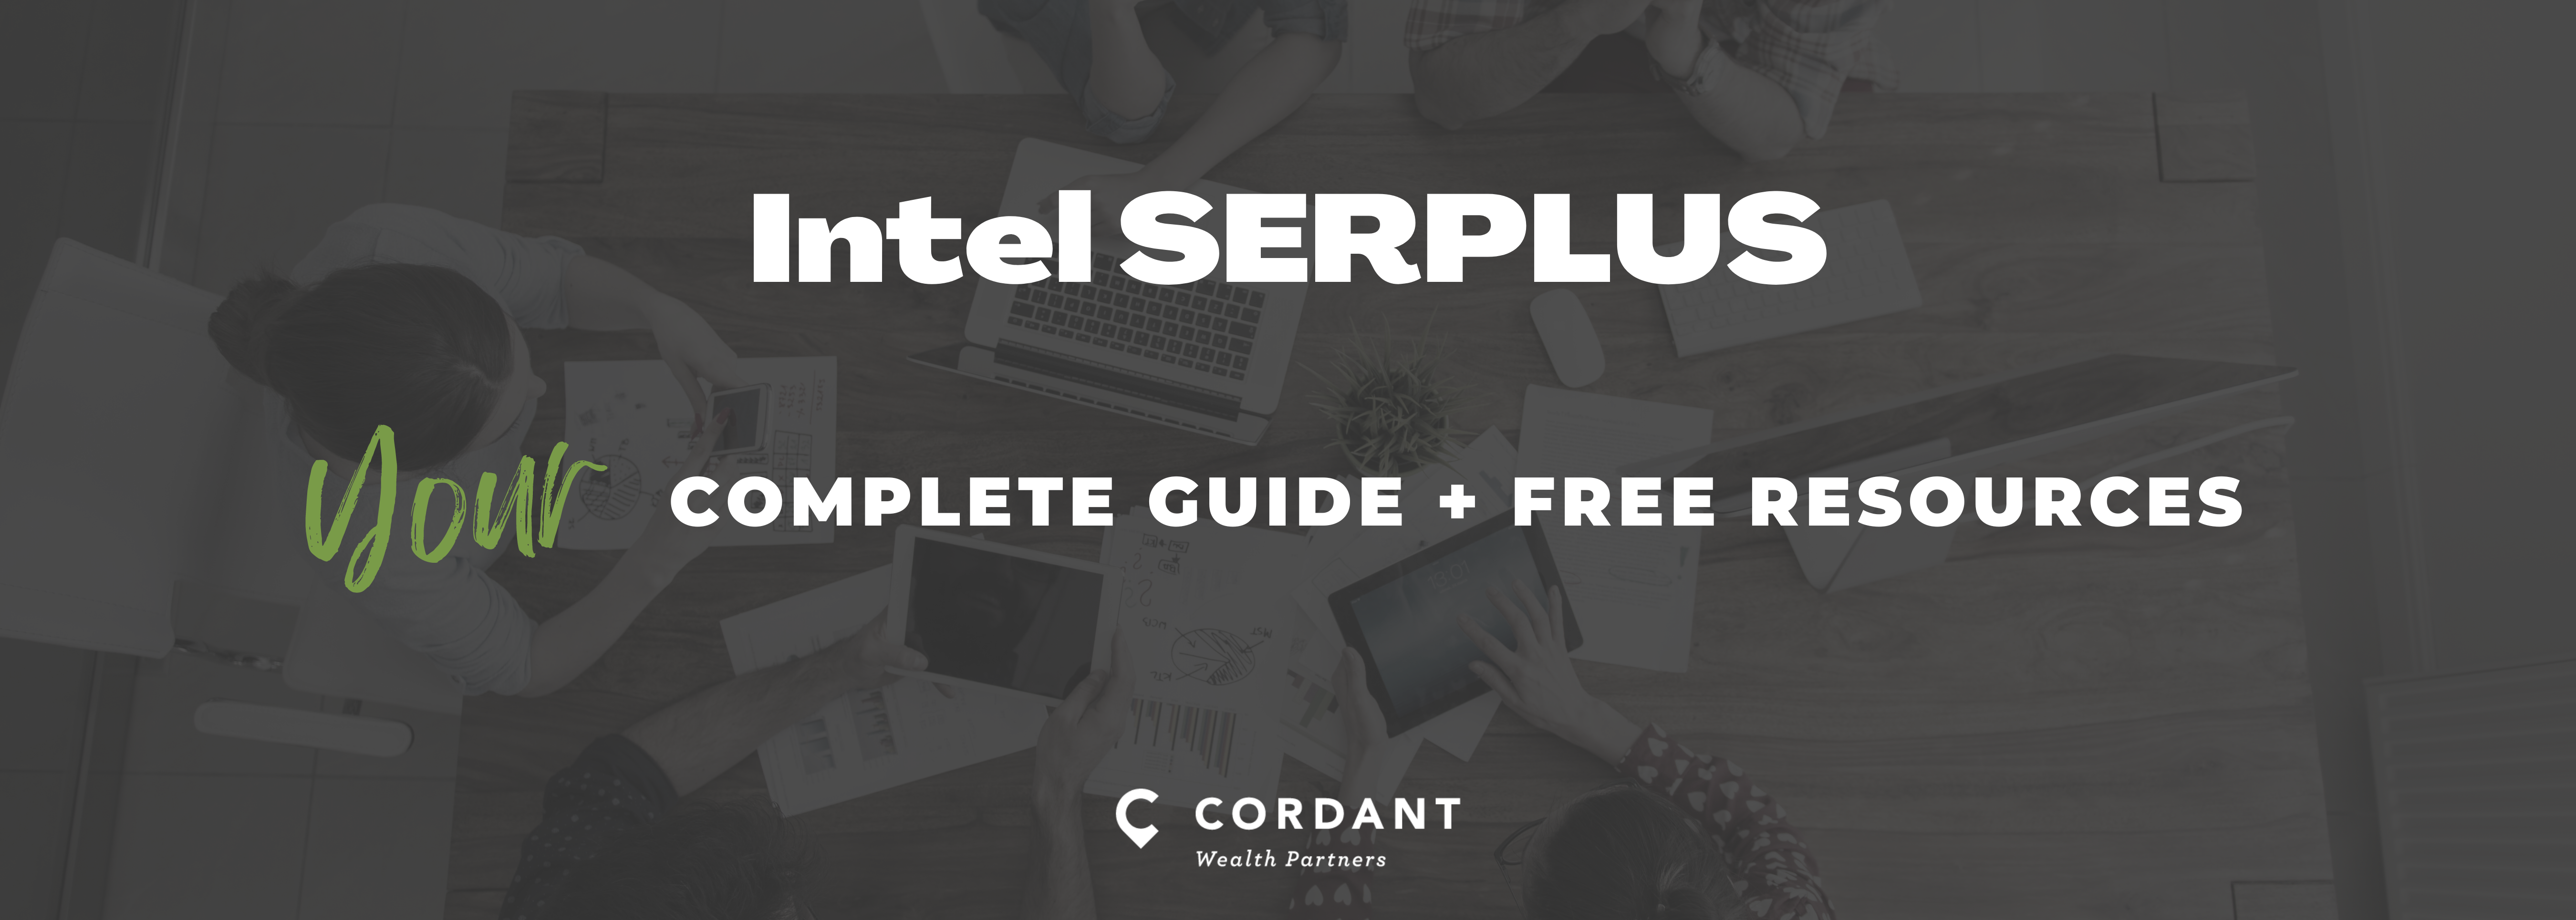 Intel SERPLUS: Your Complete Guide